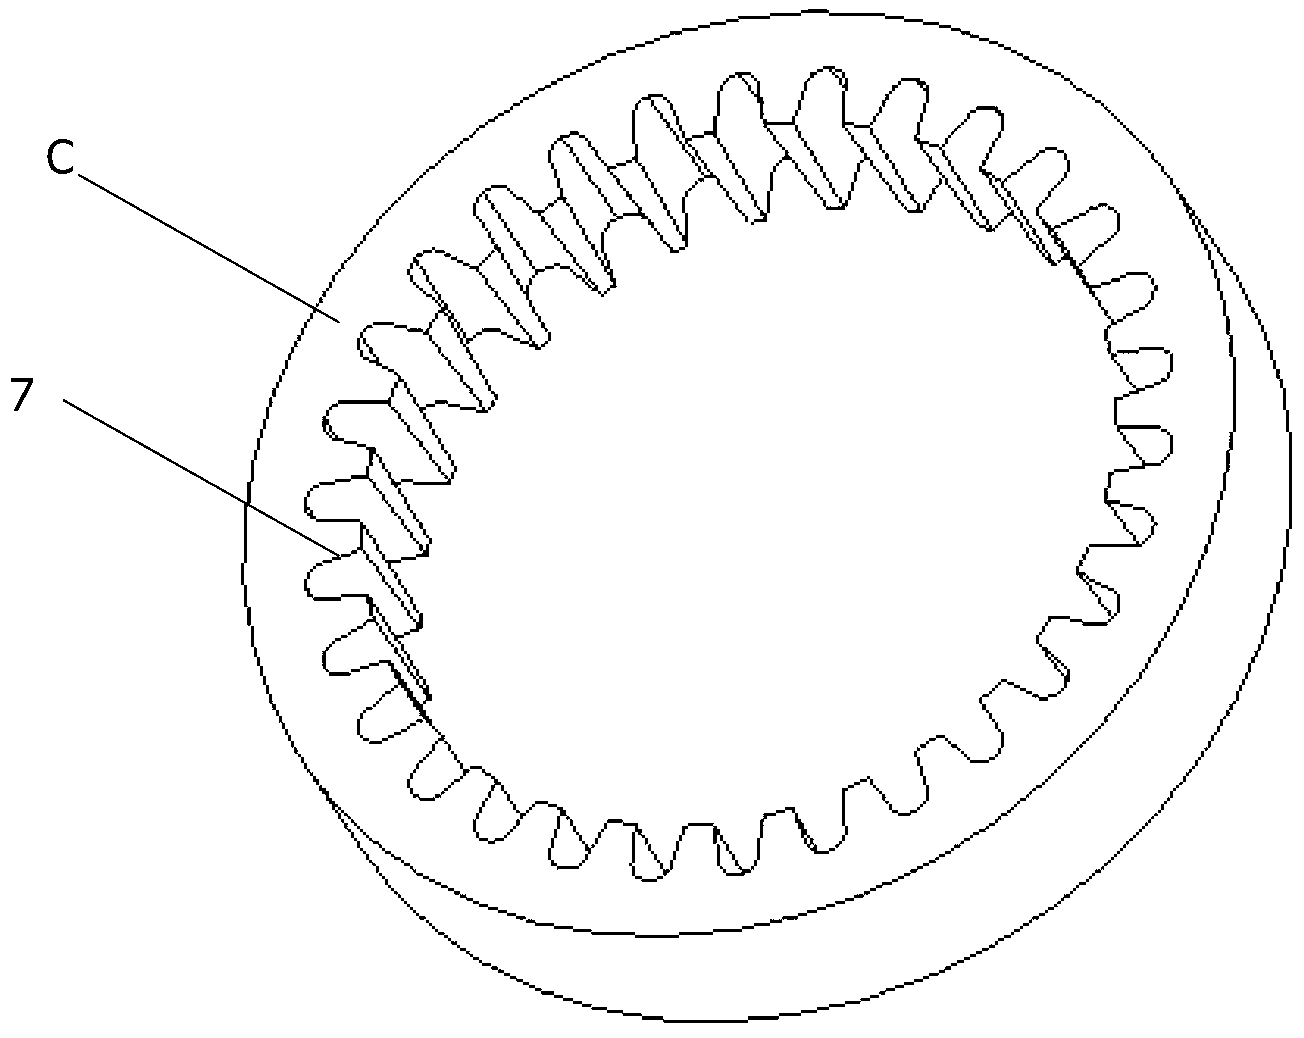 Anti-backlash transmission comprising trochoid gears and roll pins with conical teeth